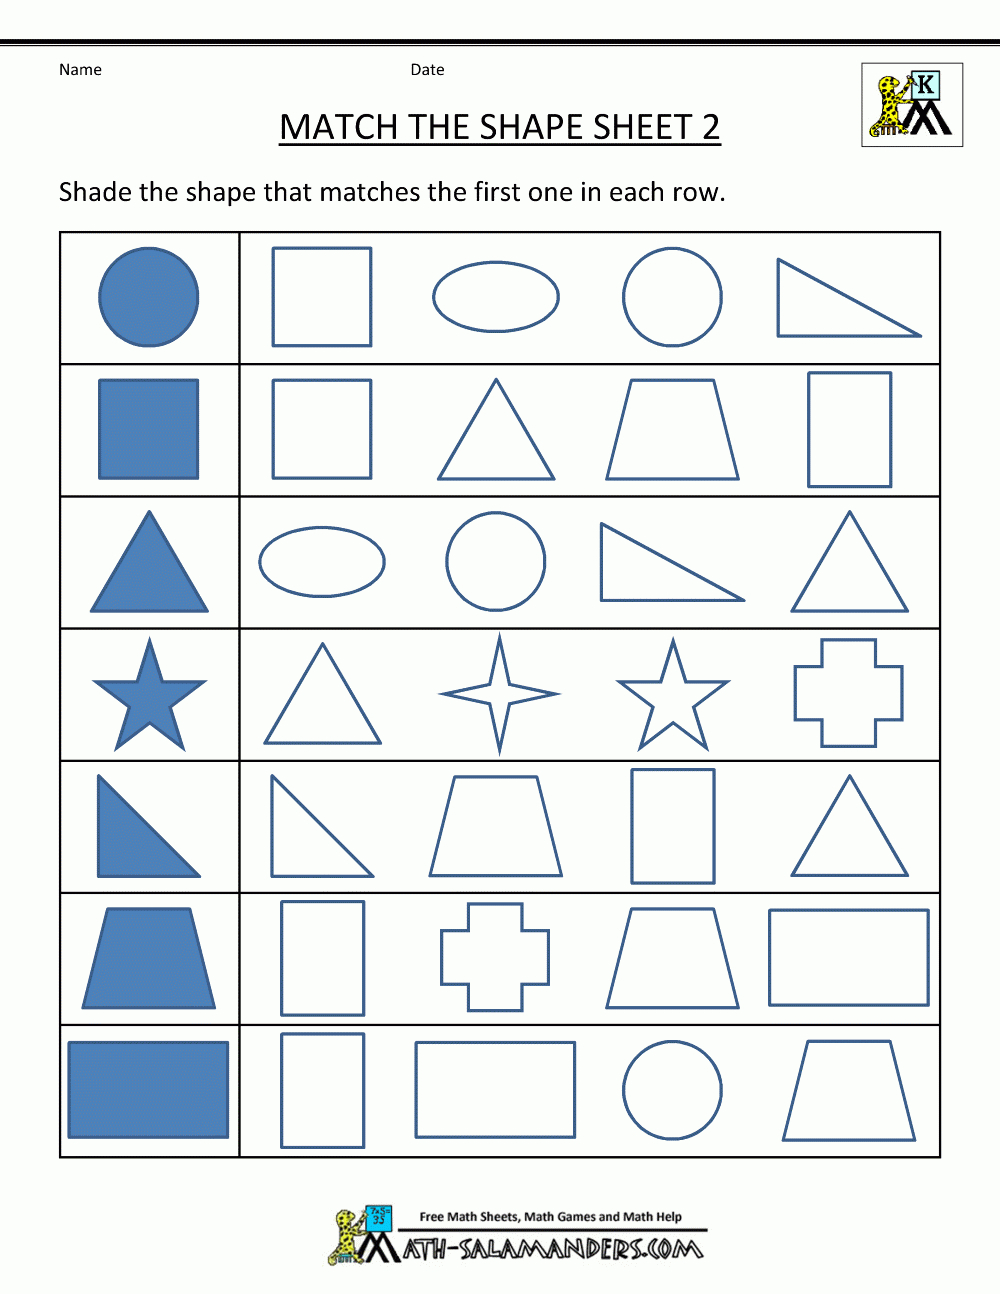 The Kindergarten Section Involves Shapes That Have Been Tipped Or - Free Printable Shapes Worksheets For Kindergarten